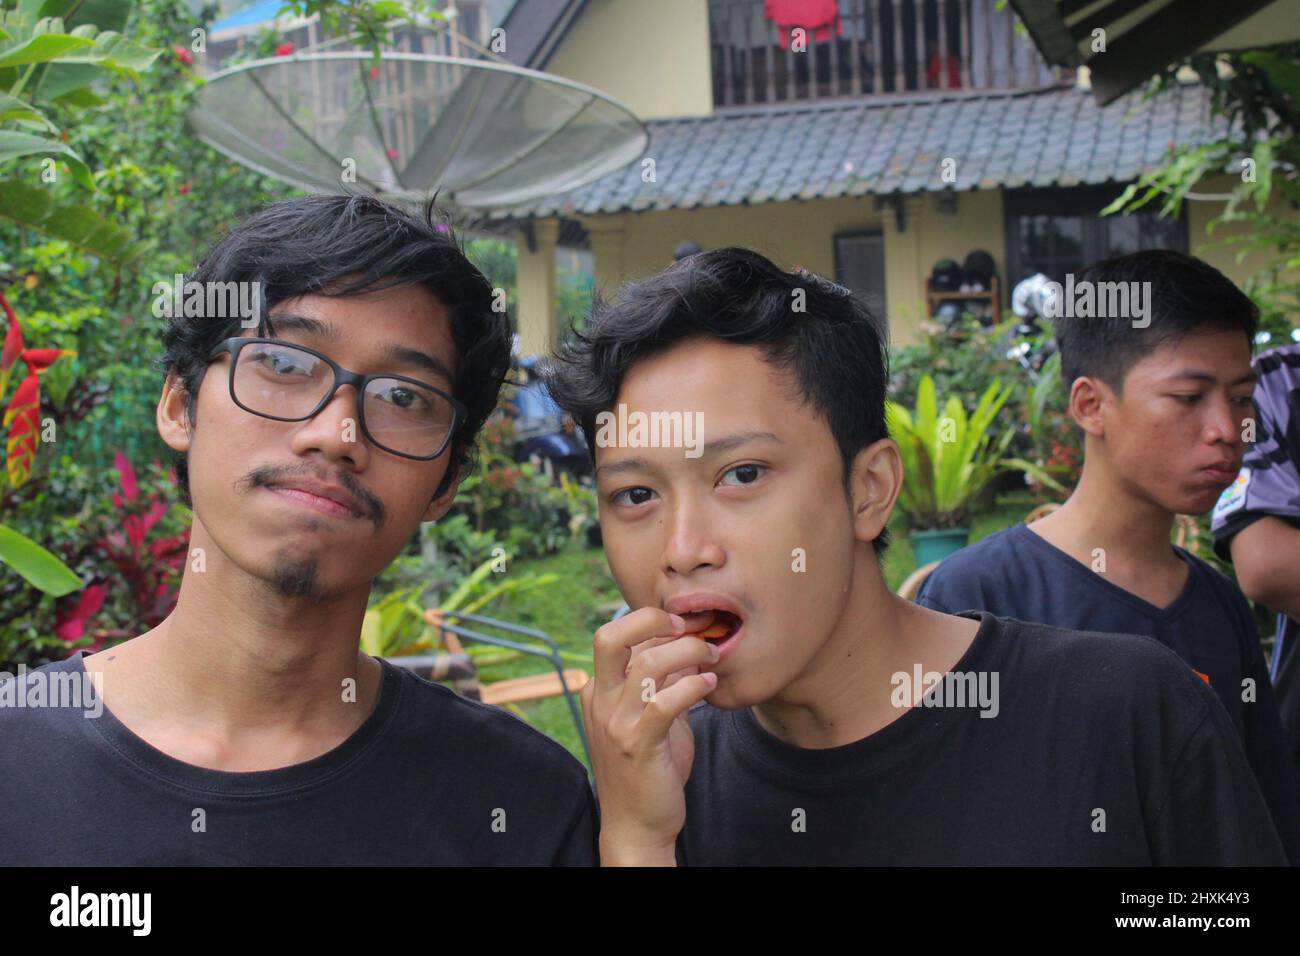 Bogor, Indonesia - 12 24 2020: two men looking at the camera, the other one is eating a snack, the other has a serious face and the other is looking t Stock Photo